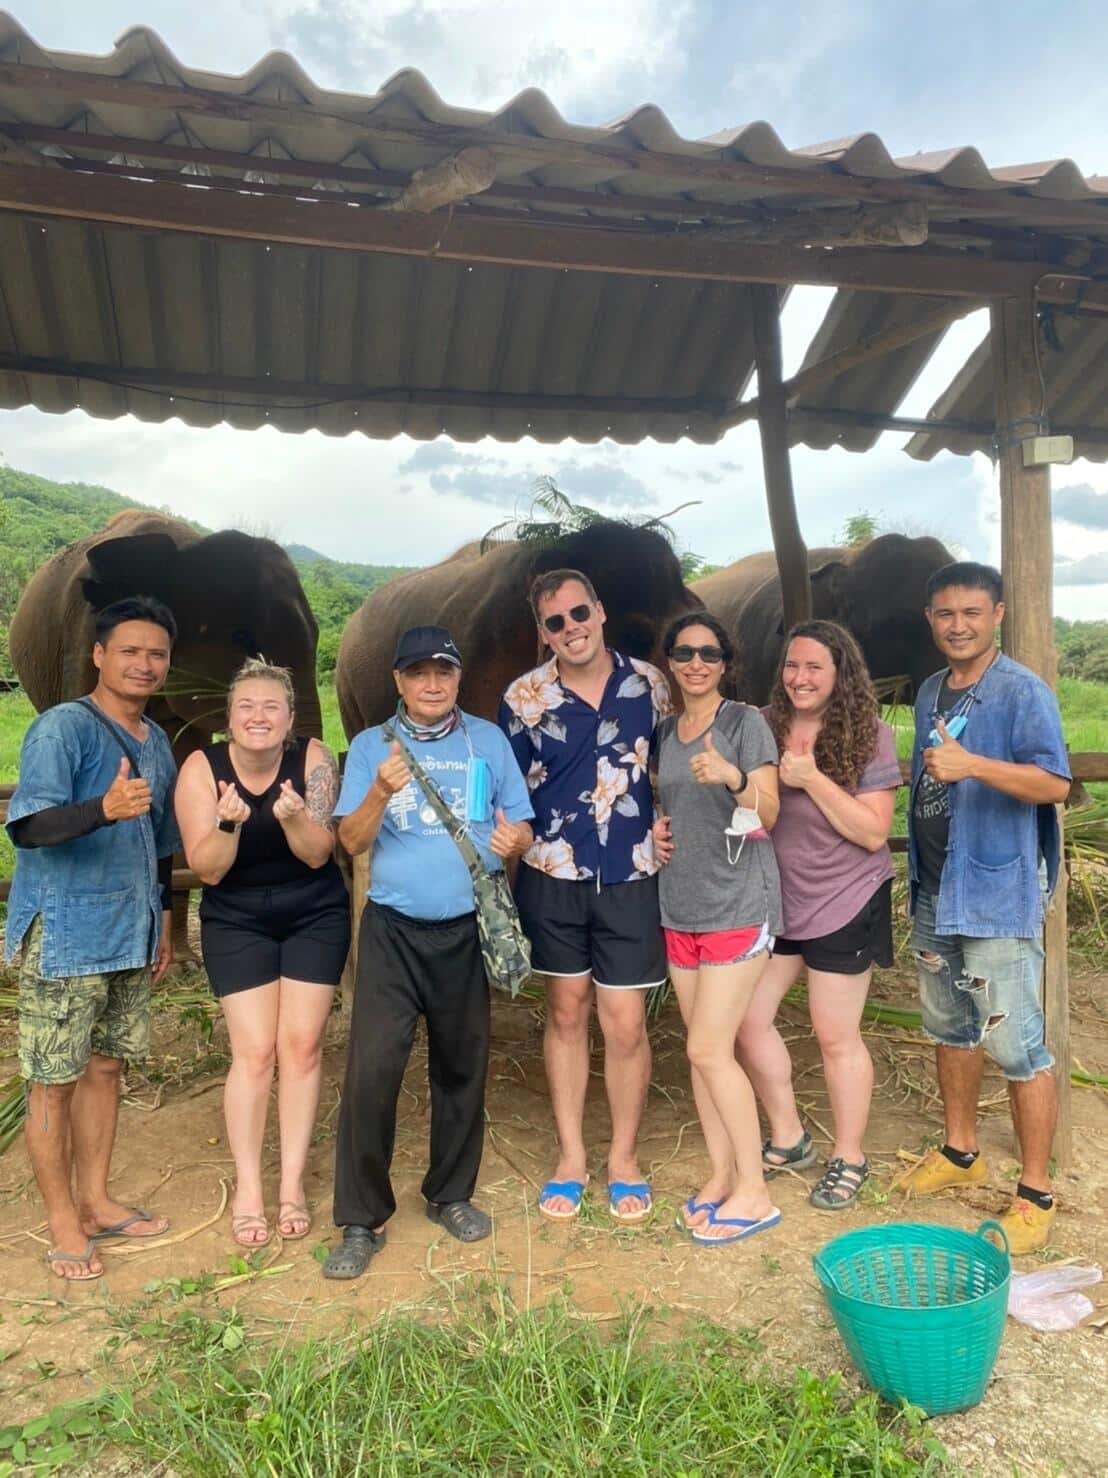 A group of people standing under a canopy with elephants at the Elephant Freedom Project.